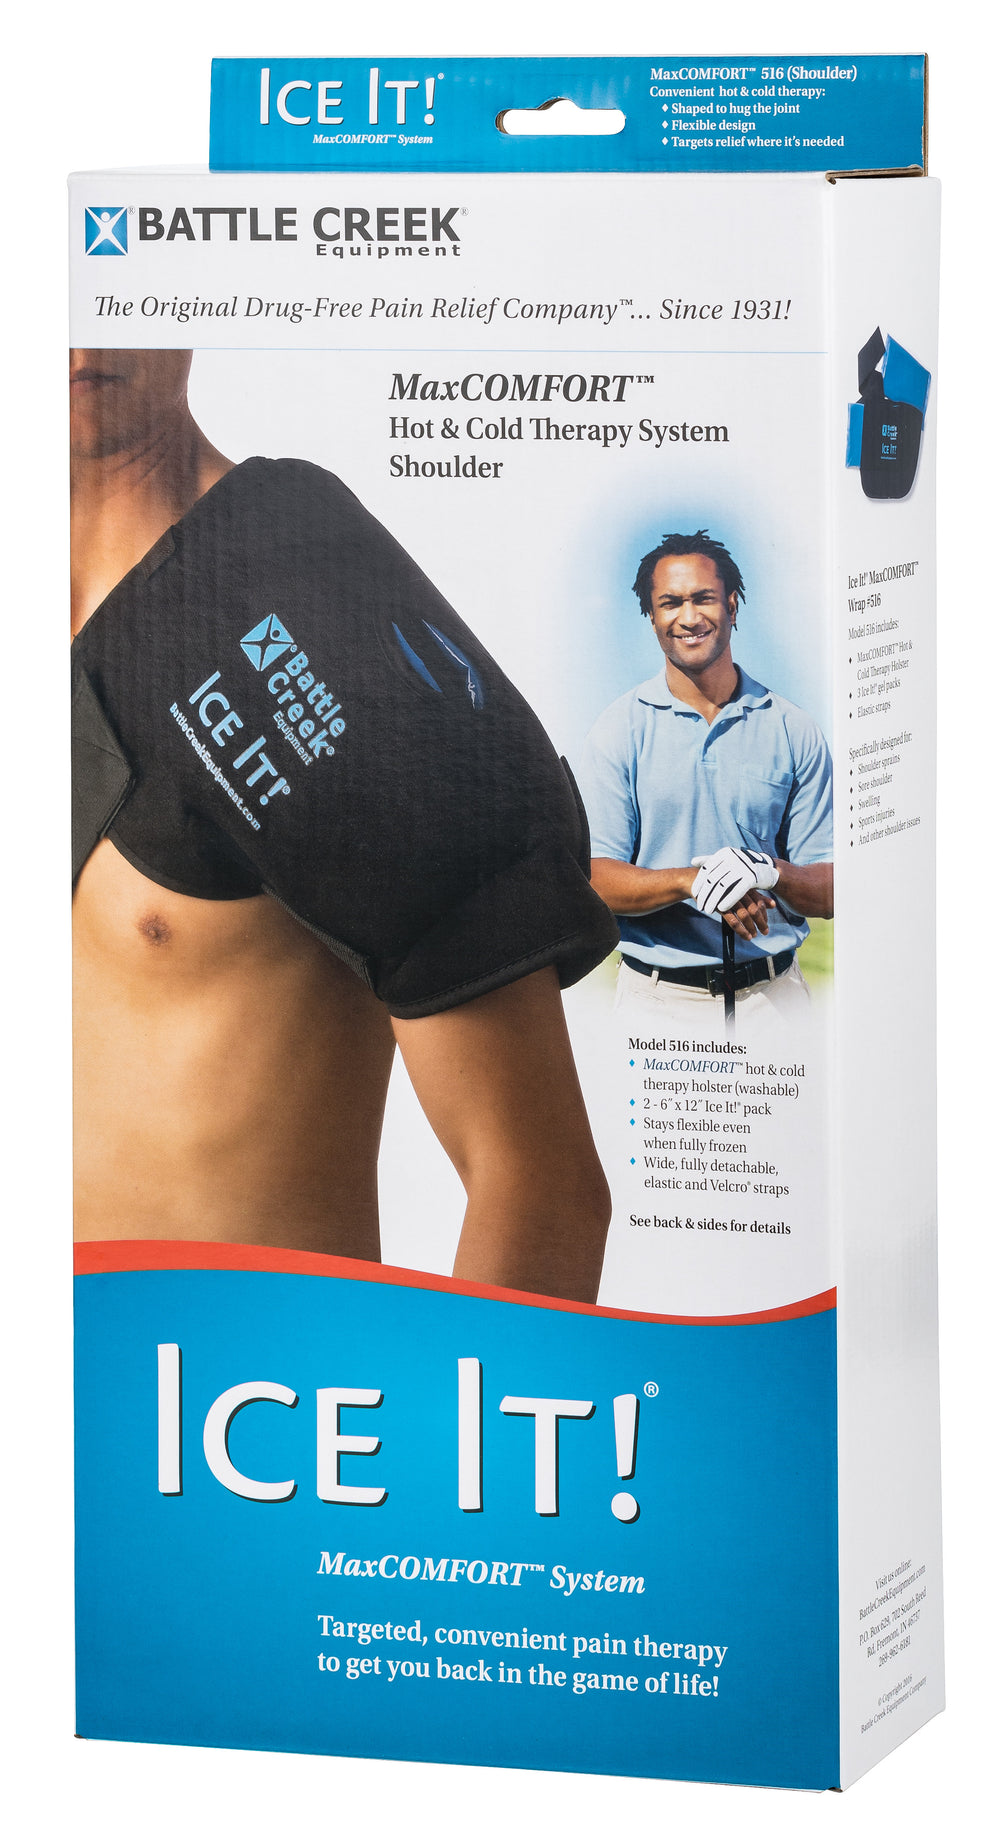 photo of a box containing a battle creek ice it shoulder wrap